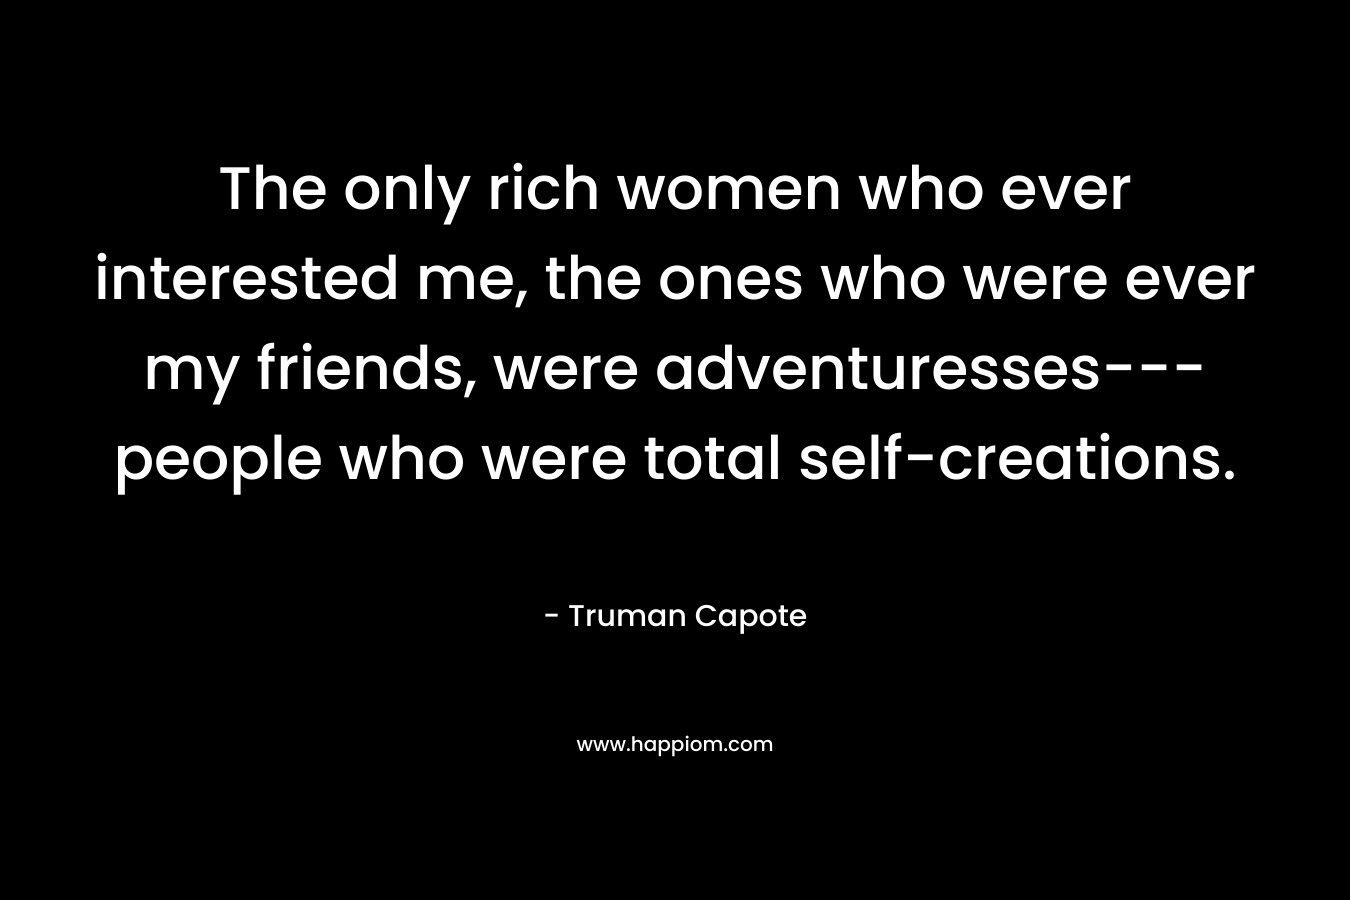 The only rich women who ever interested me, the ones who were ever my friends, were adventuresses—people who were total self-creations. – Truman Capote